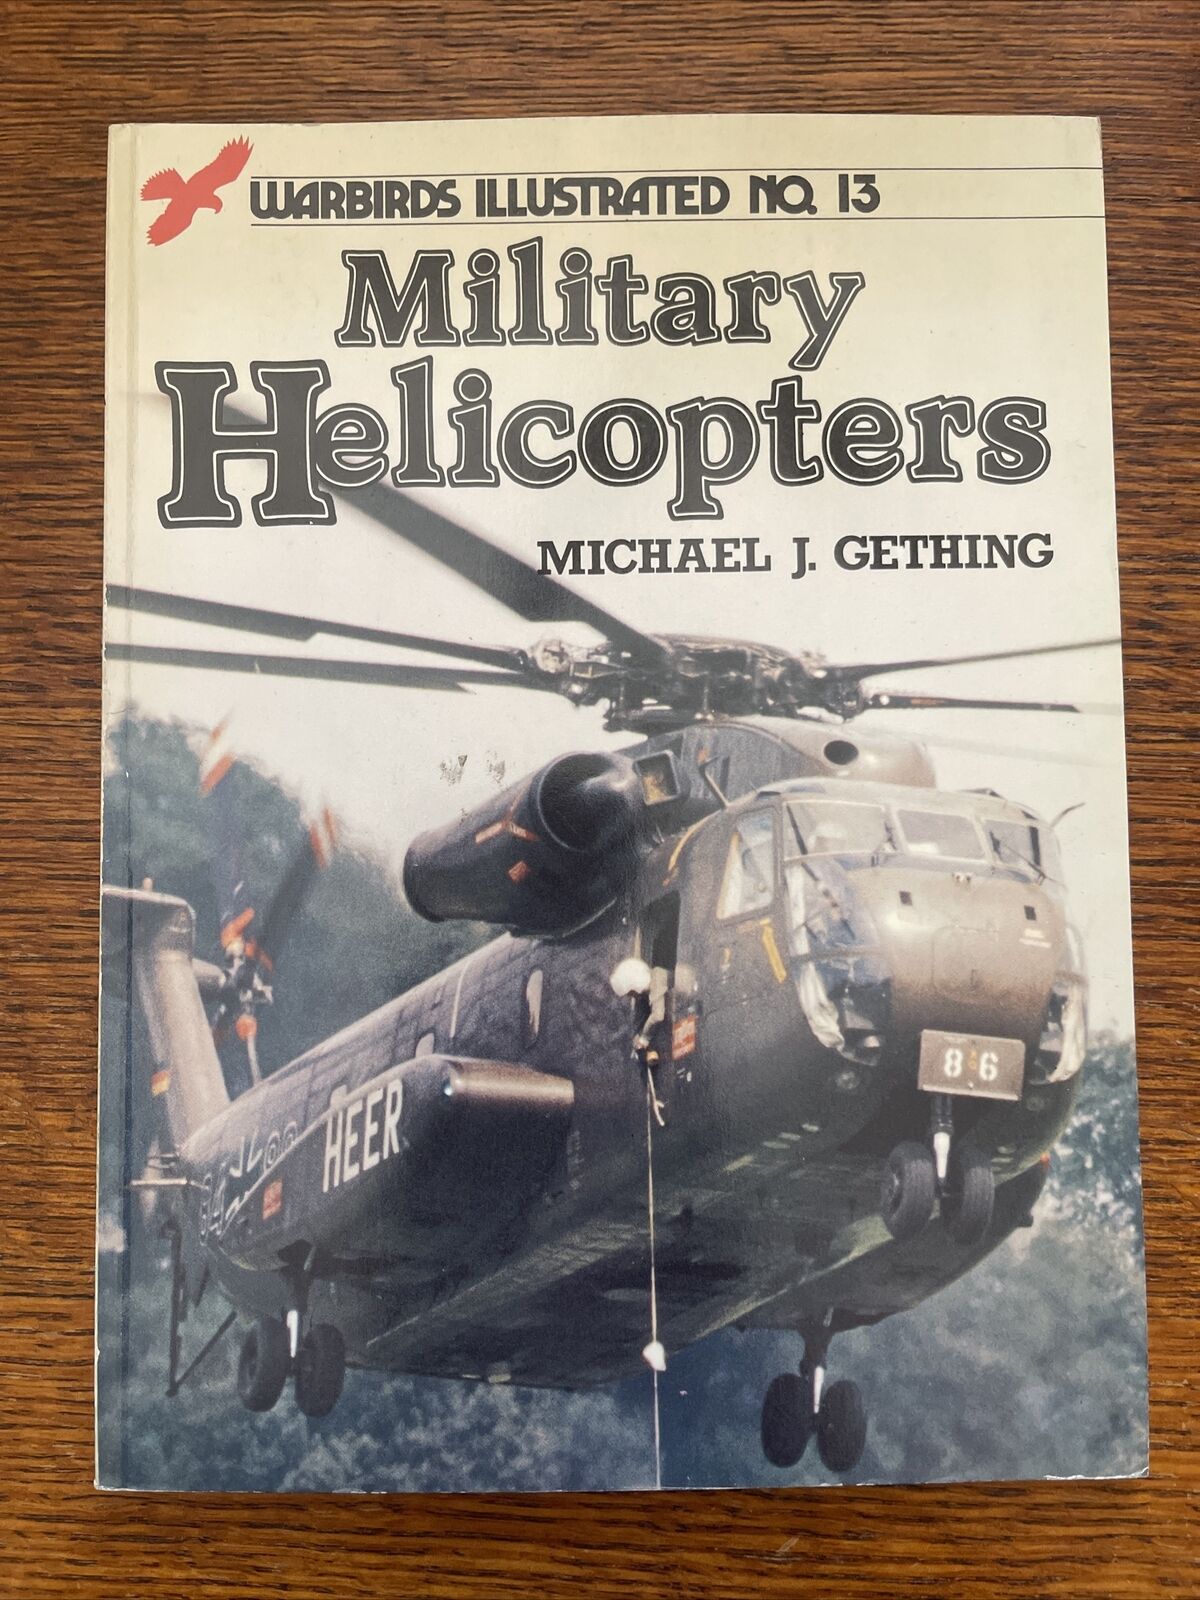 MILITARY HELICOPTERS: Warbirds Illustrated #13 by M. Gething 1983